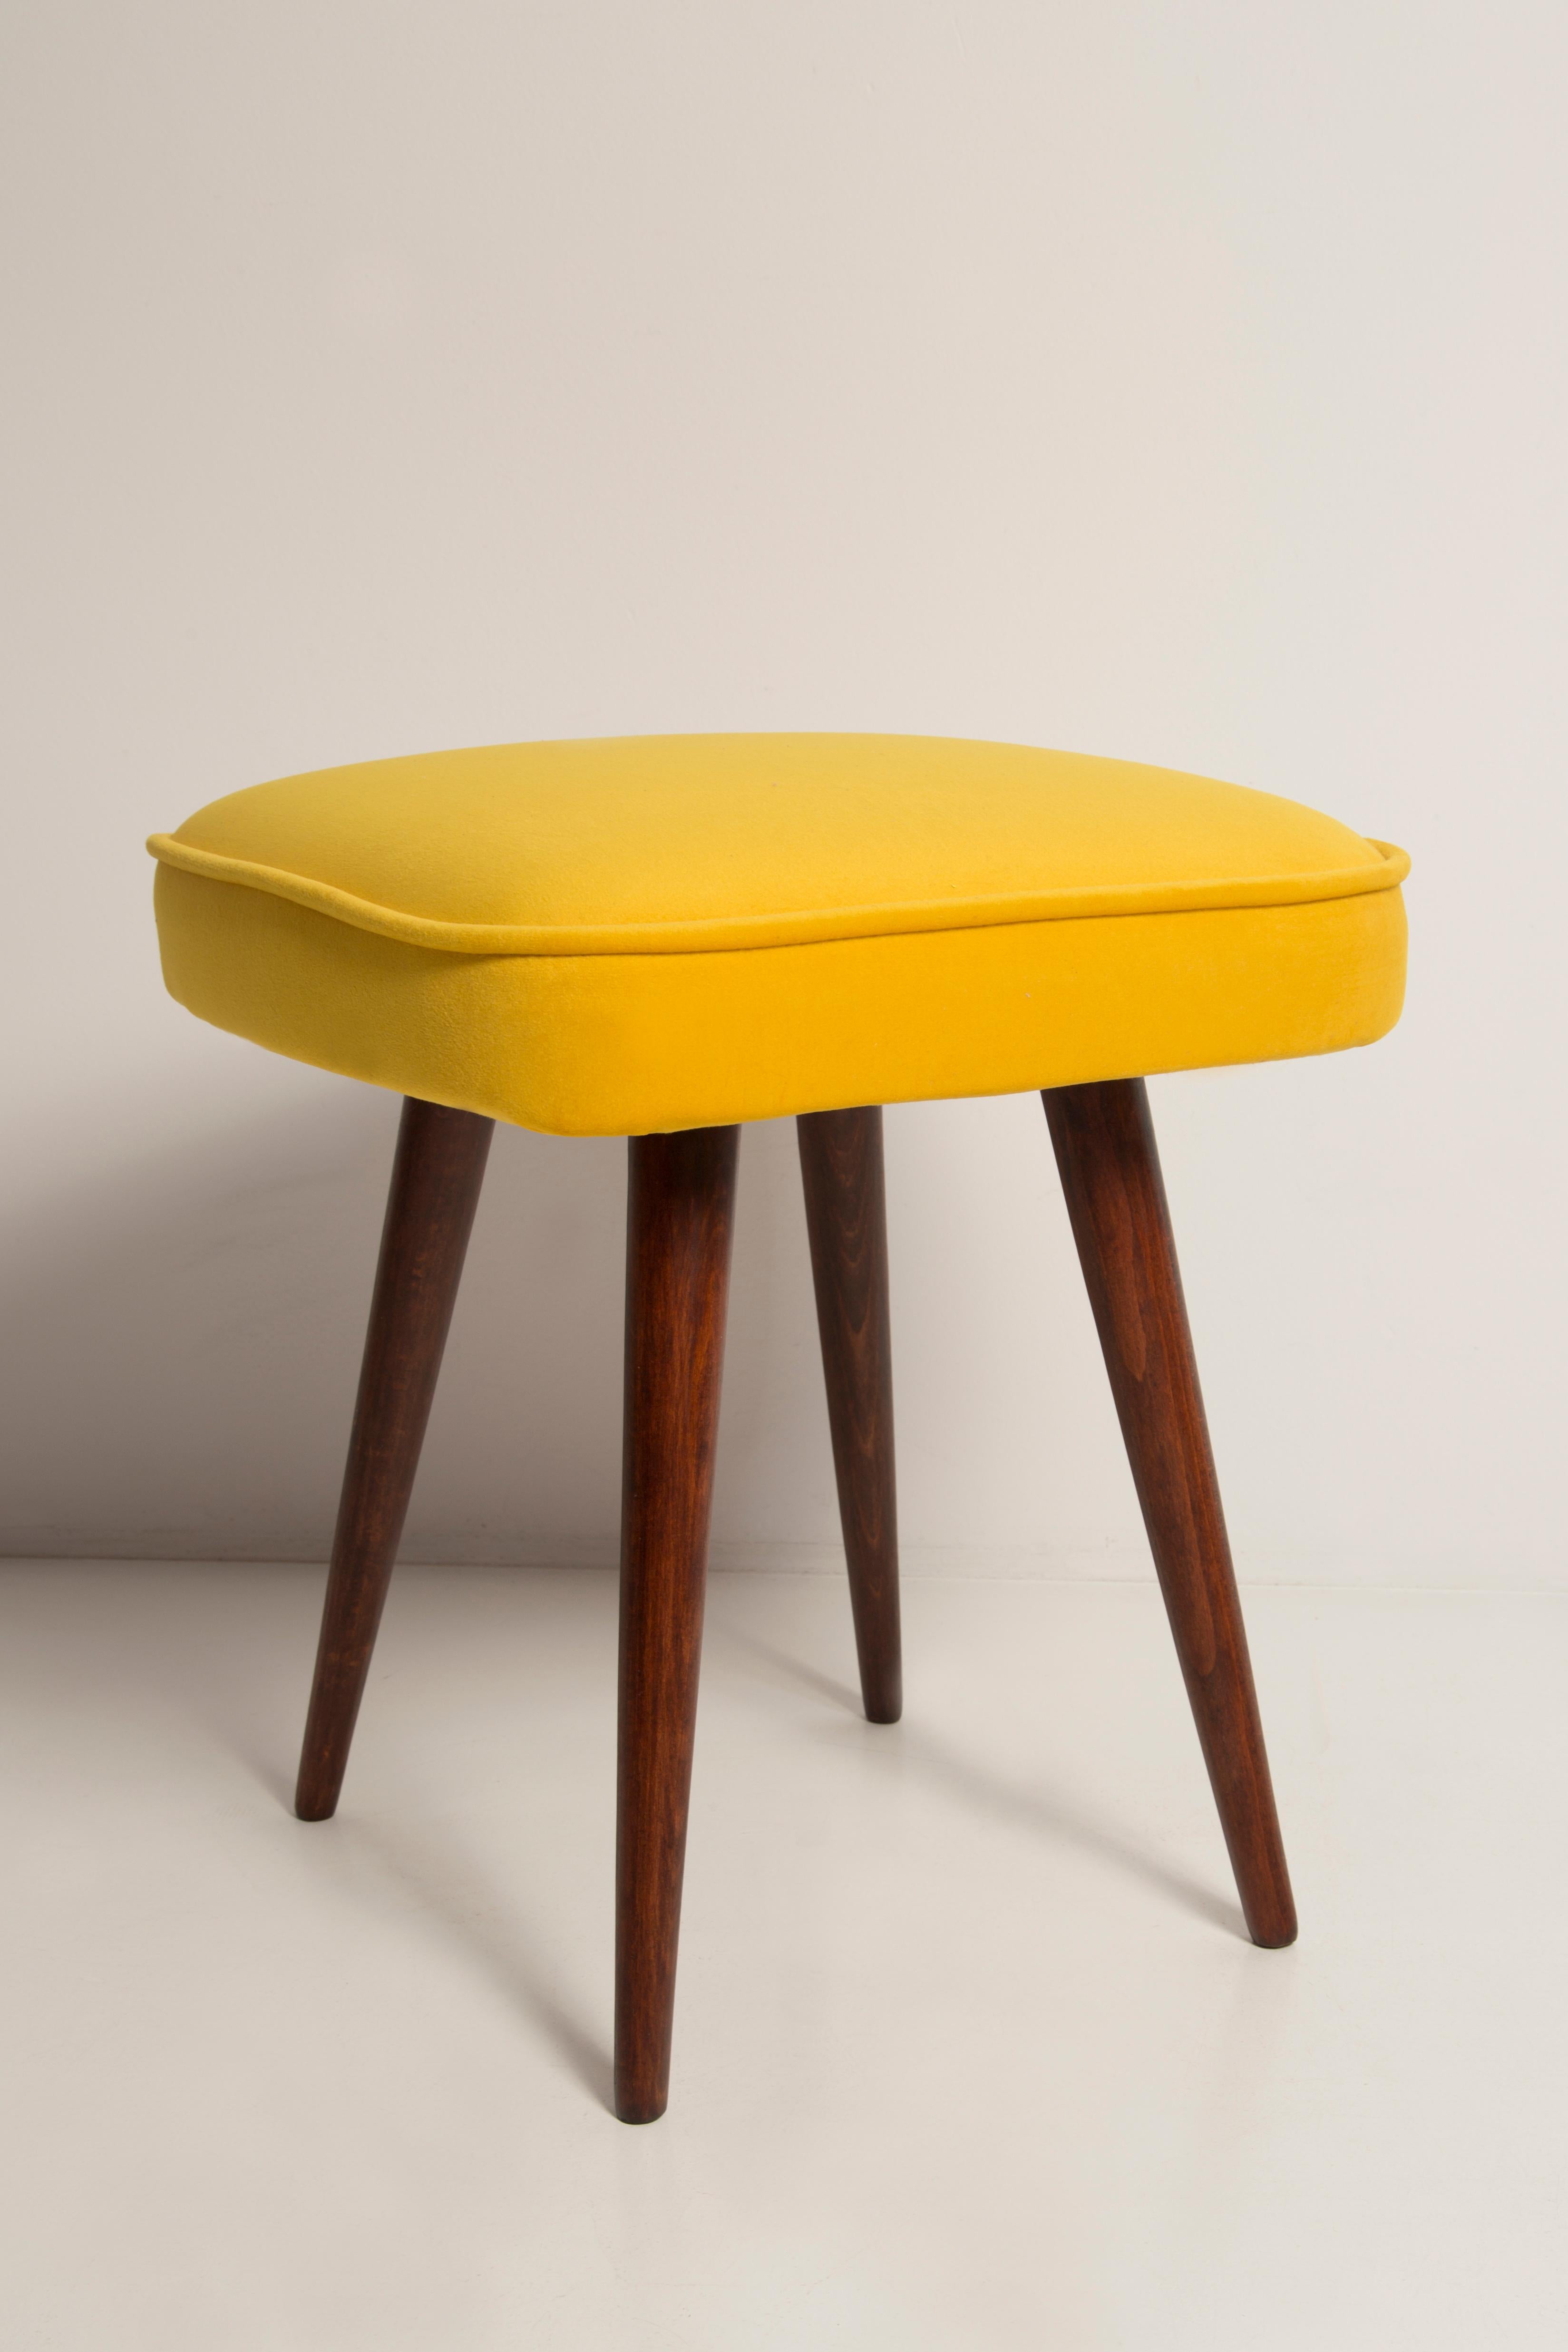 Set of Two Mid-Century Yellow Velvet Foot Stools, Europe, 1960s For Sale 5